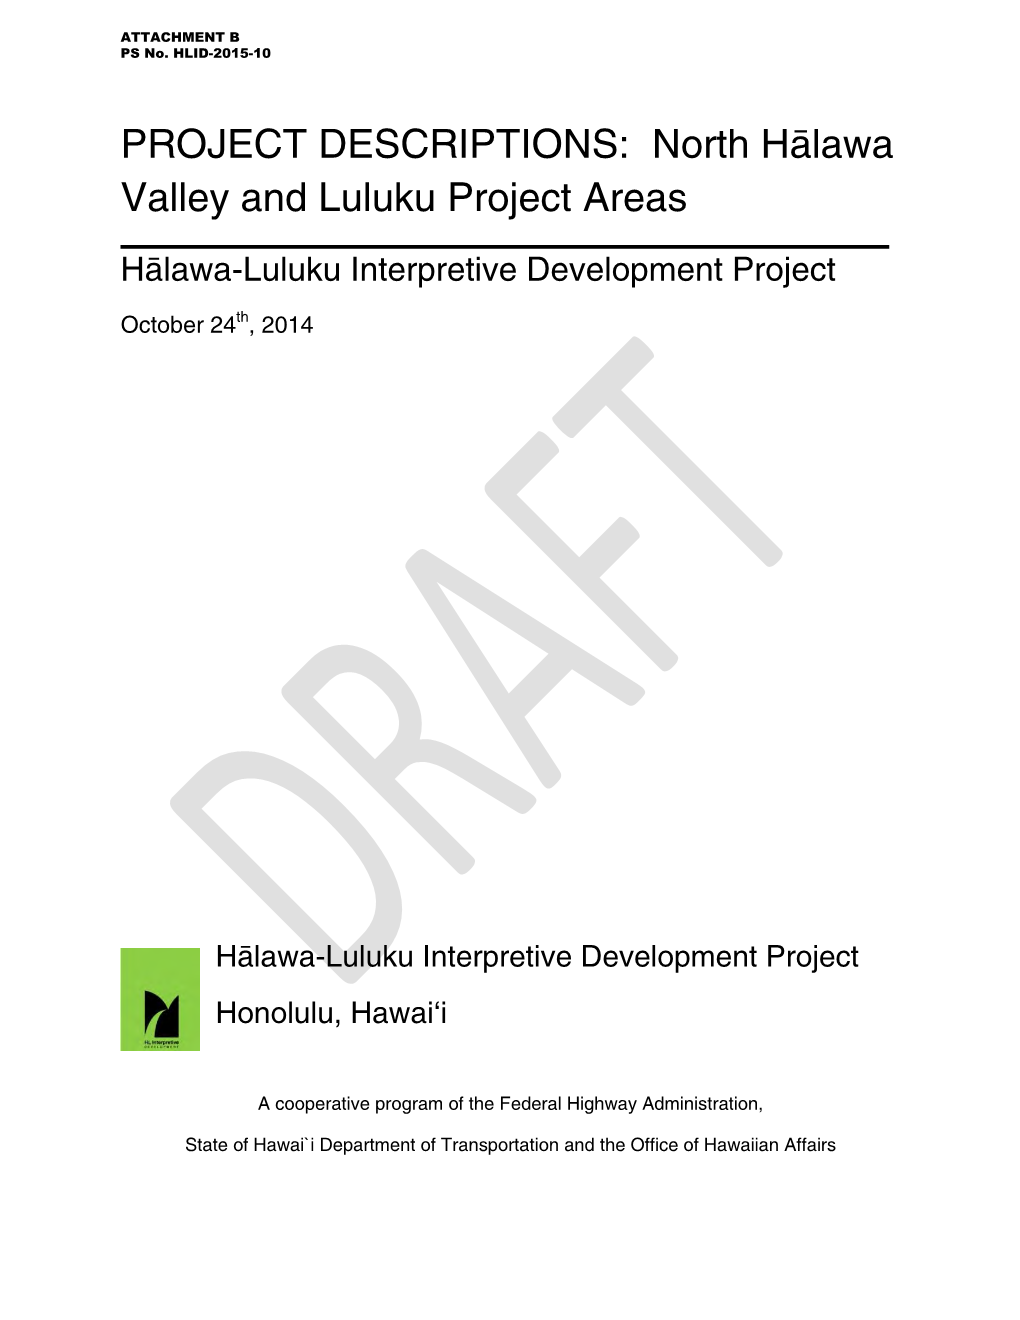 PROJECT DESCRIPTIONS: North Hälawa Valley and Luluku Project Areas